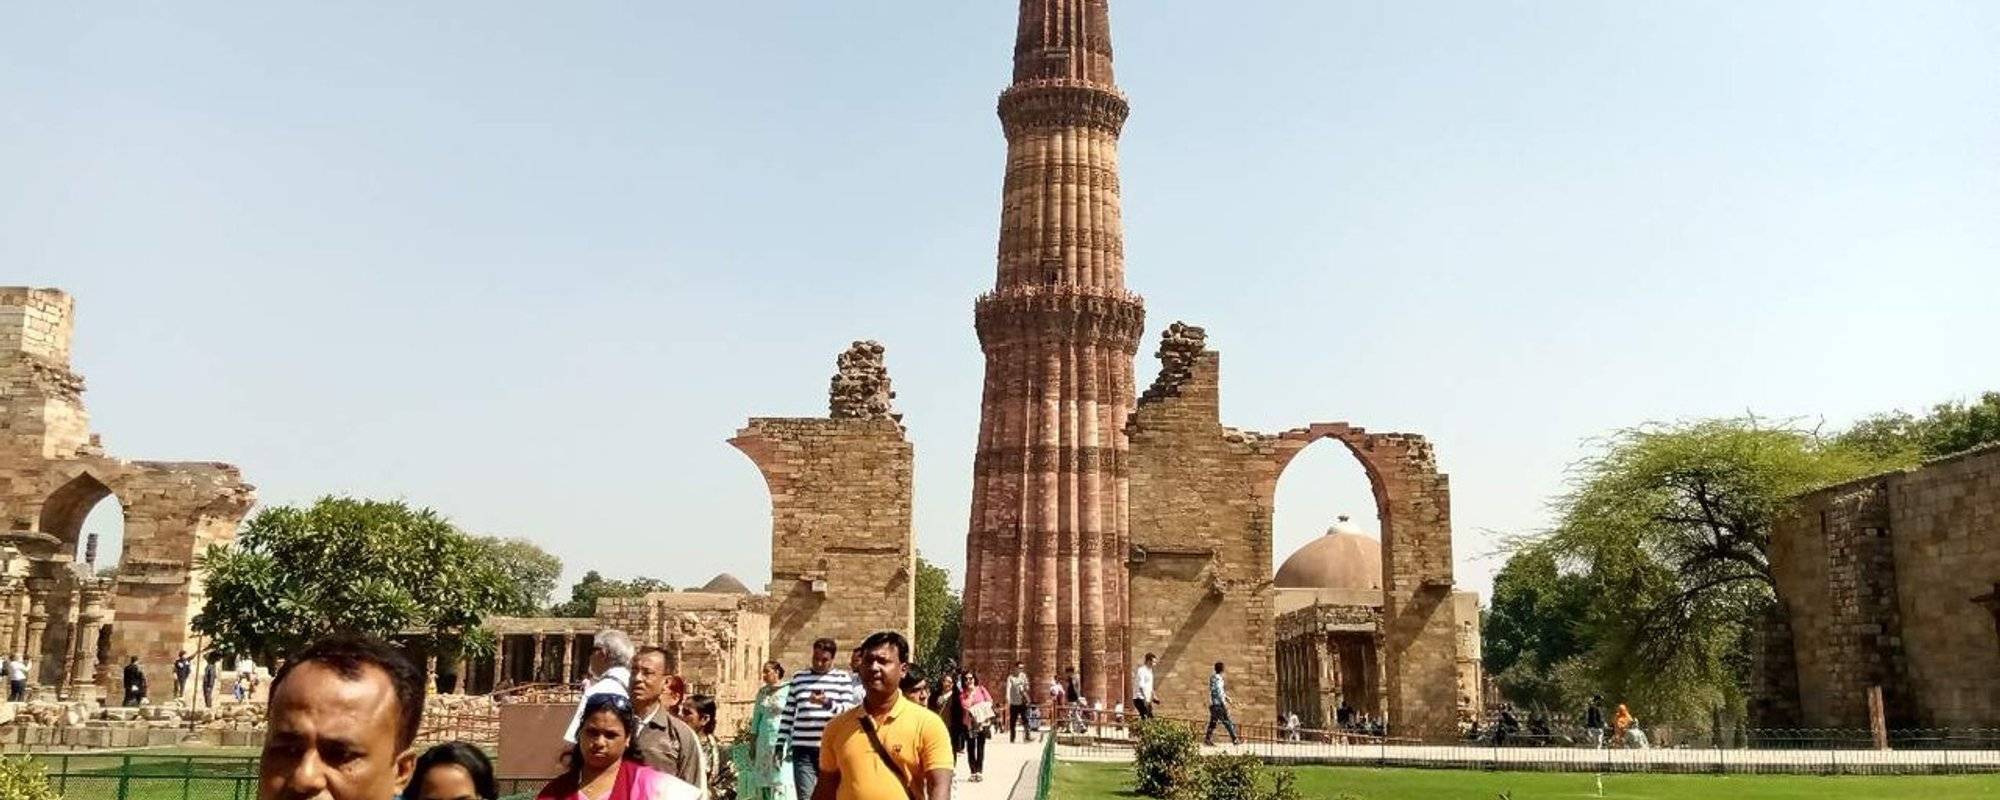 A Day Out at Qutub Minar, India. [Once the highest monument]